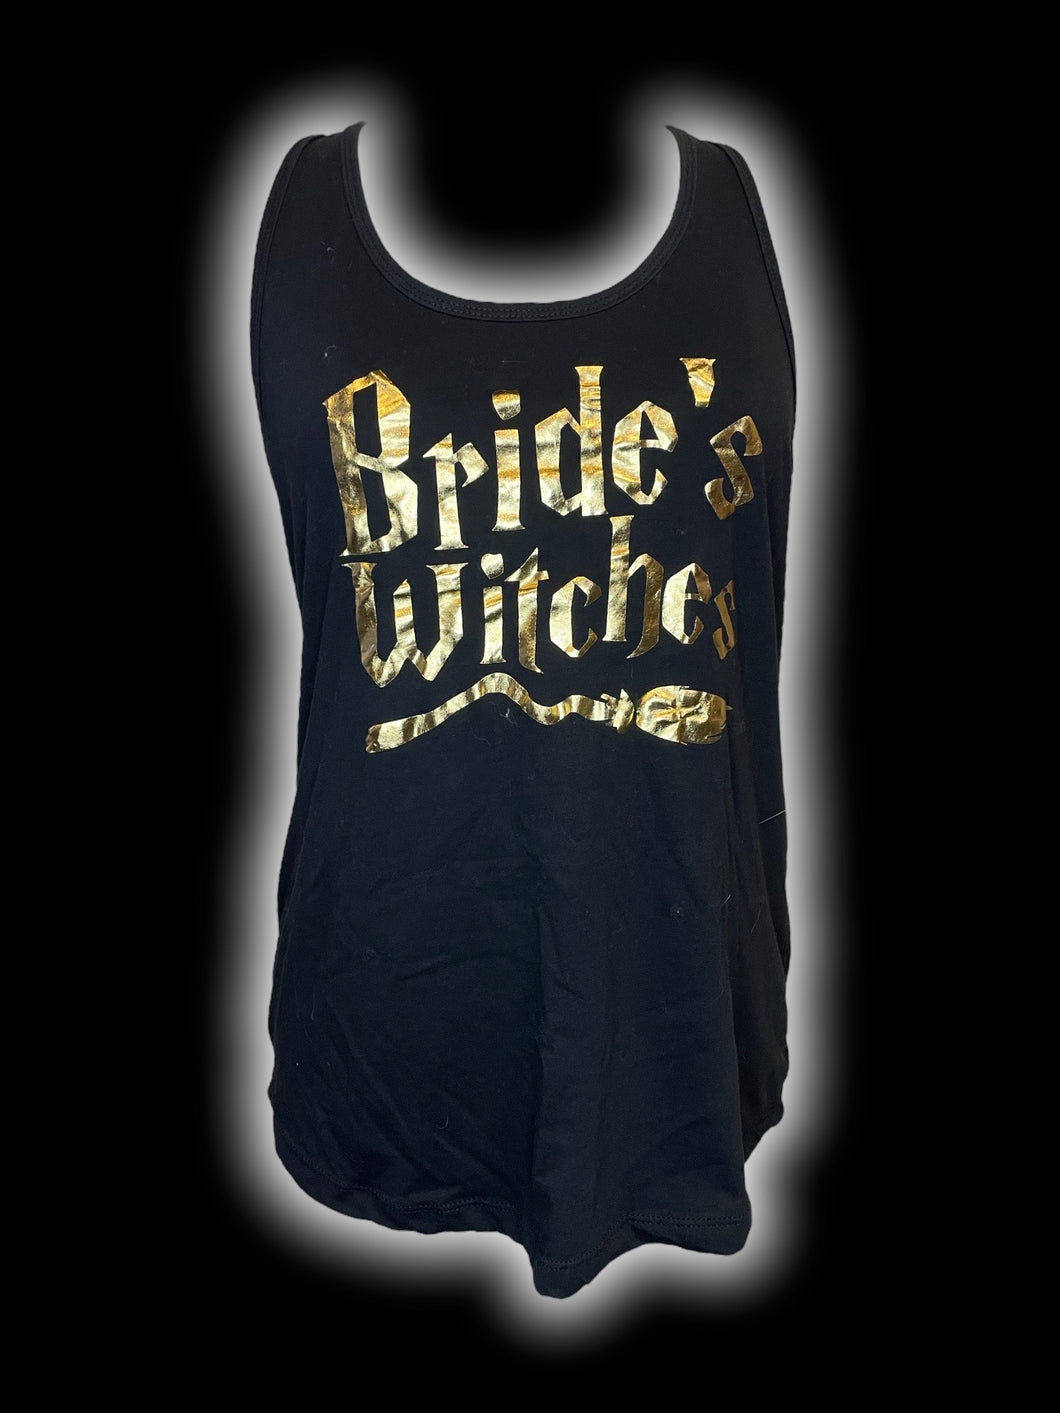 XL Black & metallic gold “Bride’s Witches” sleeveless racer back top